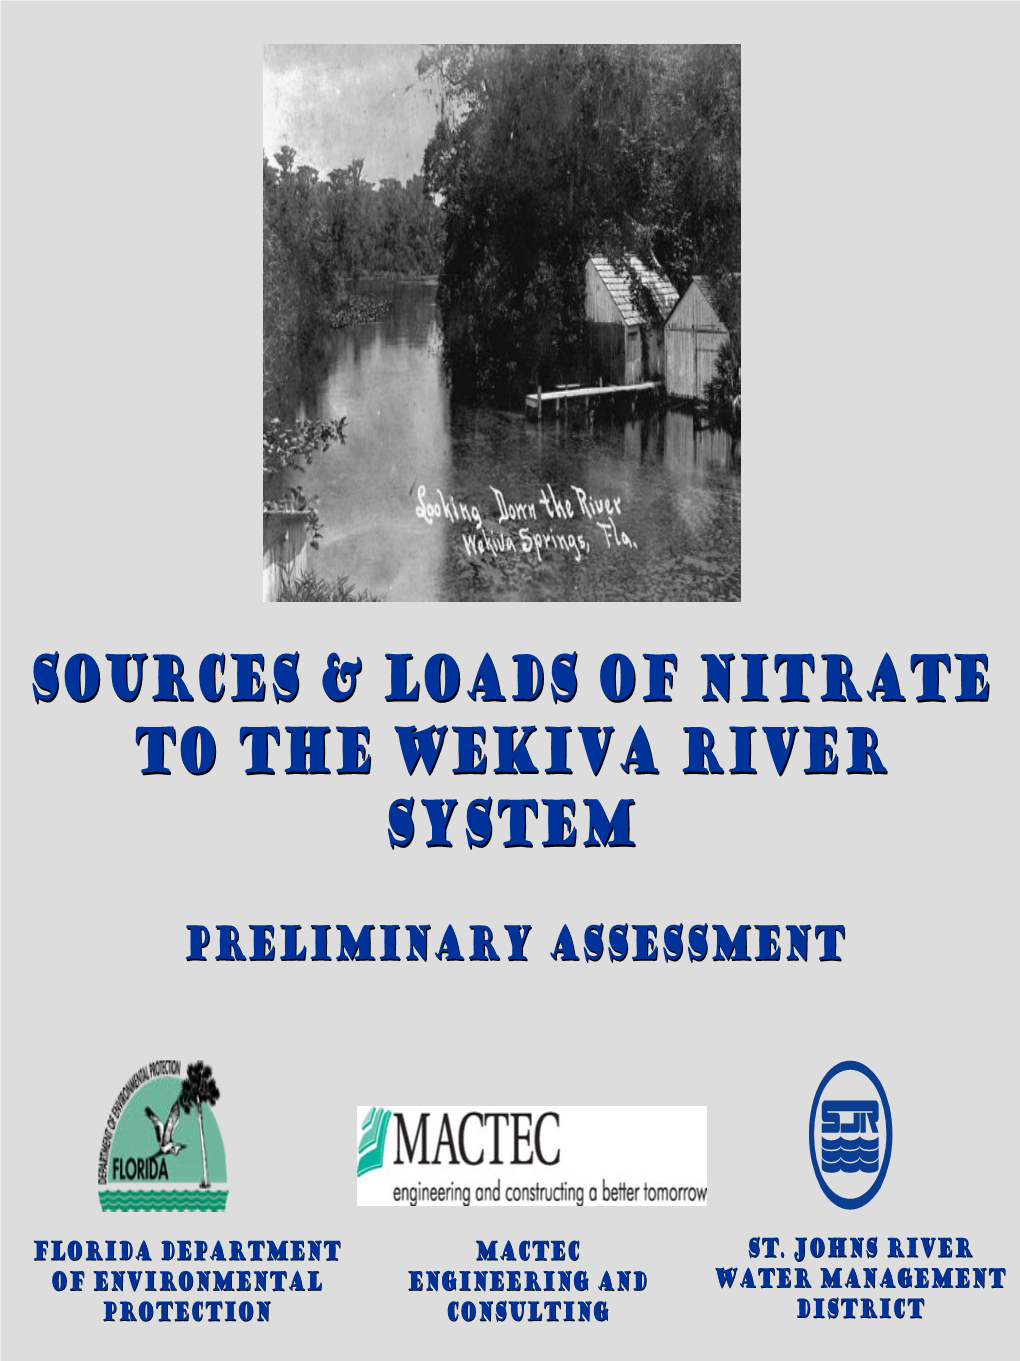 Sources & Loads of Nitrate to the Wekiva River System